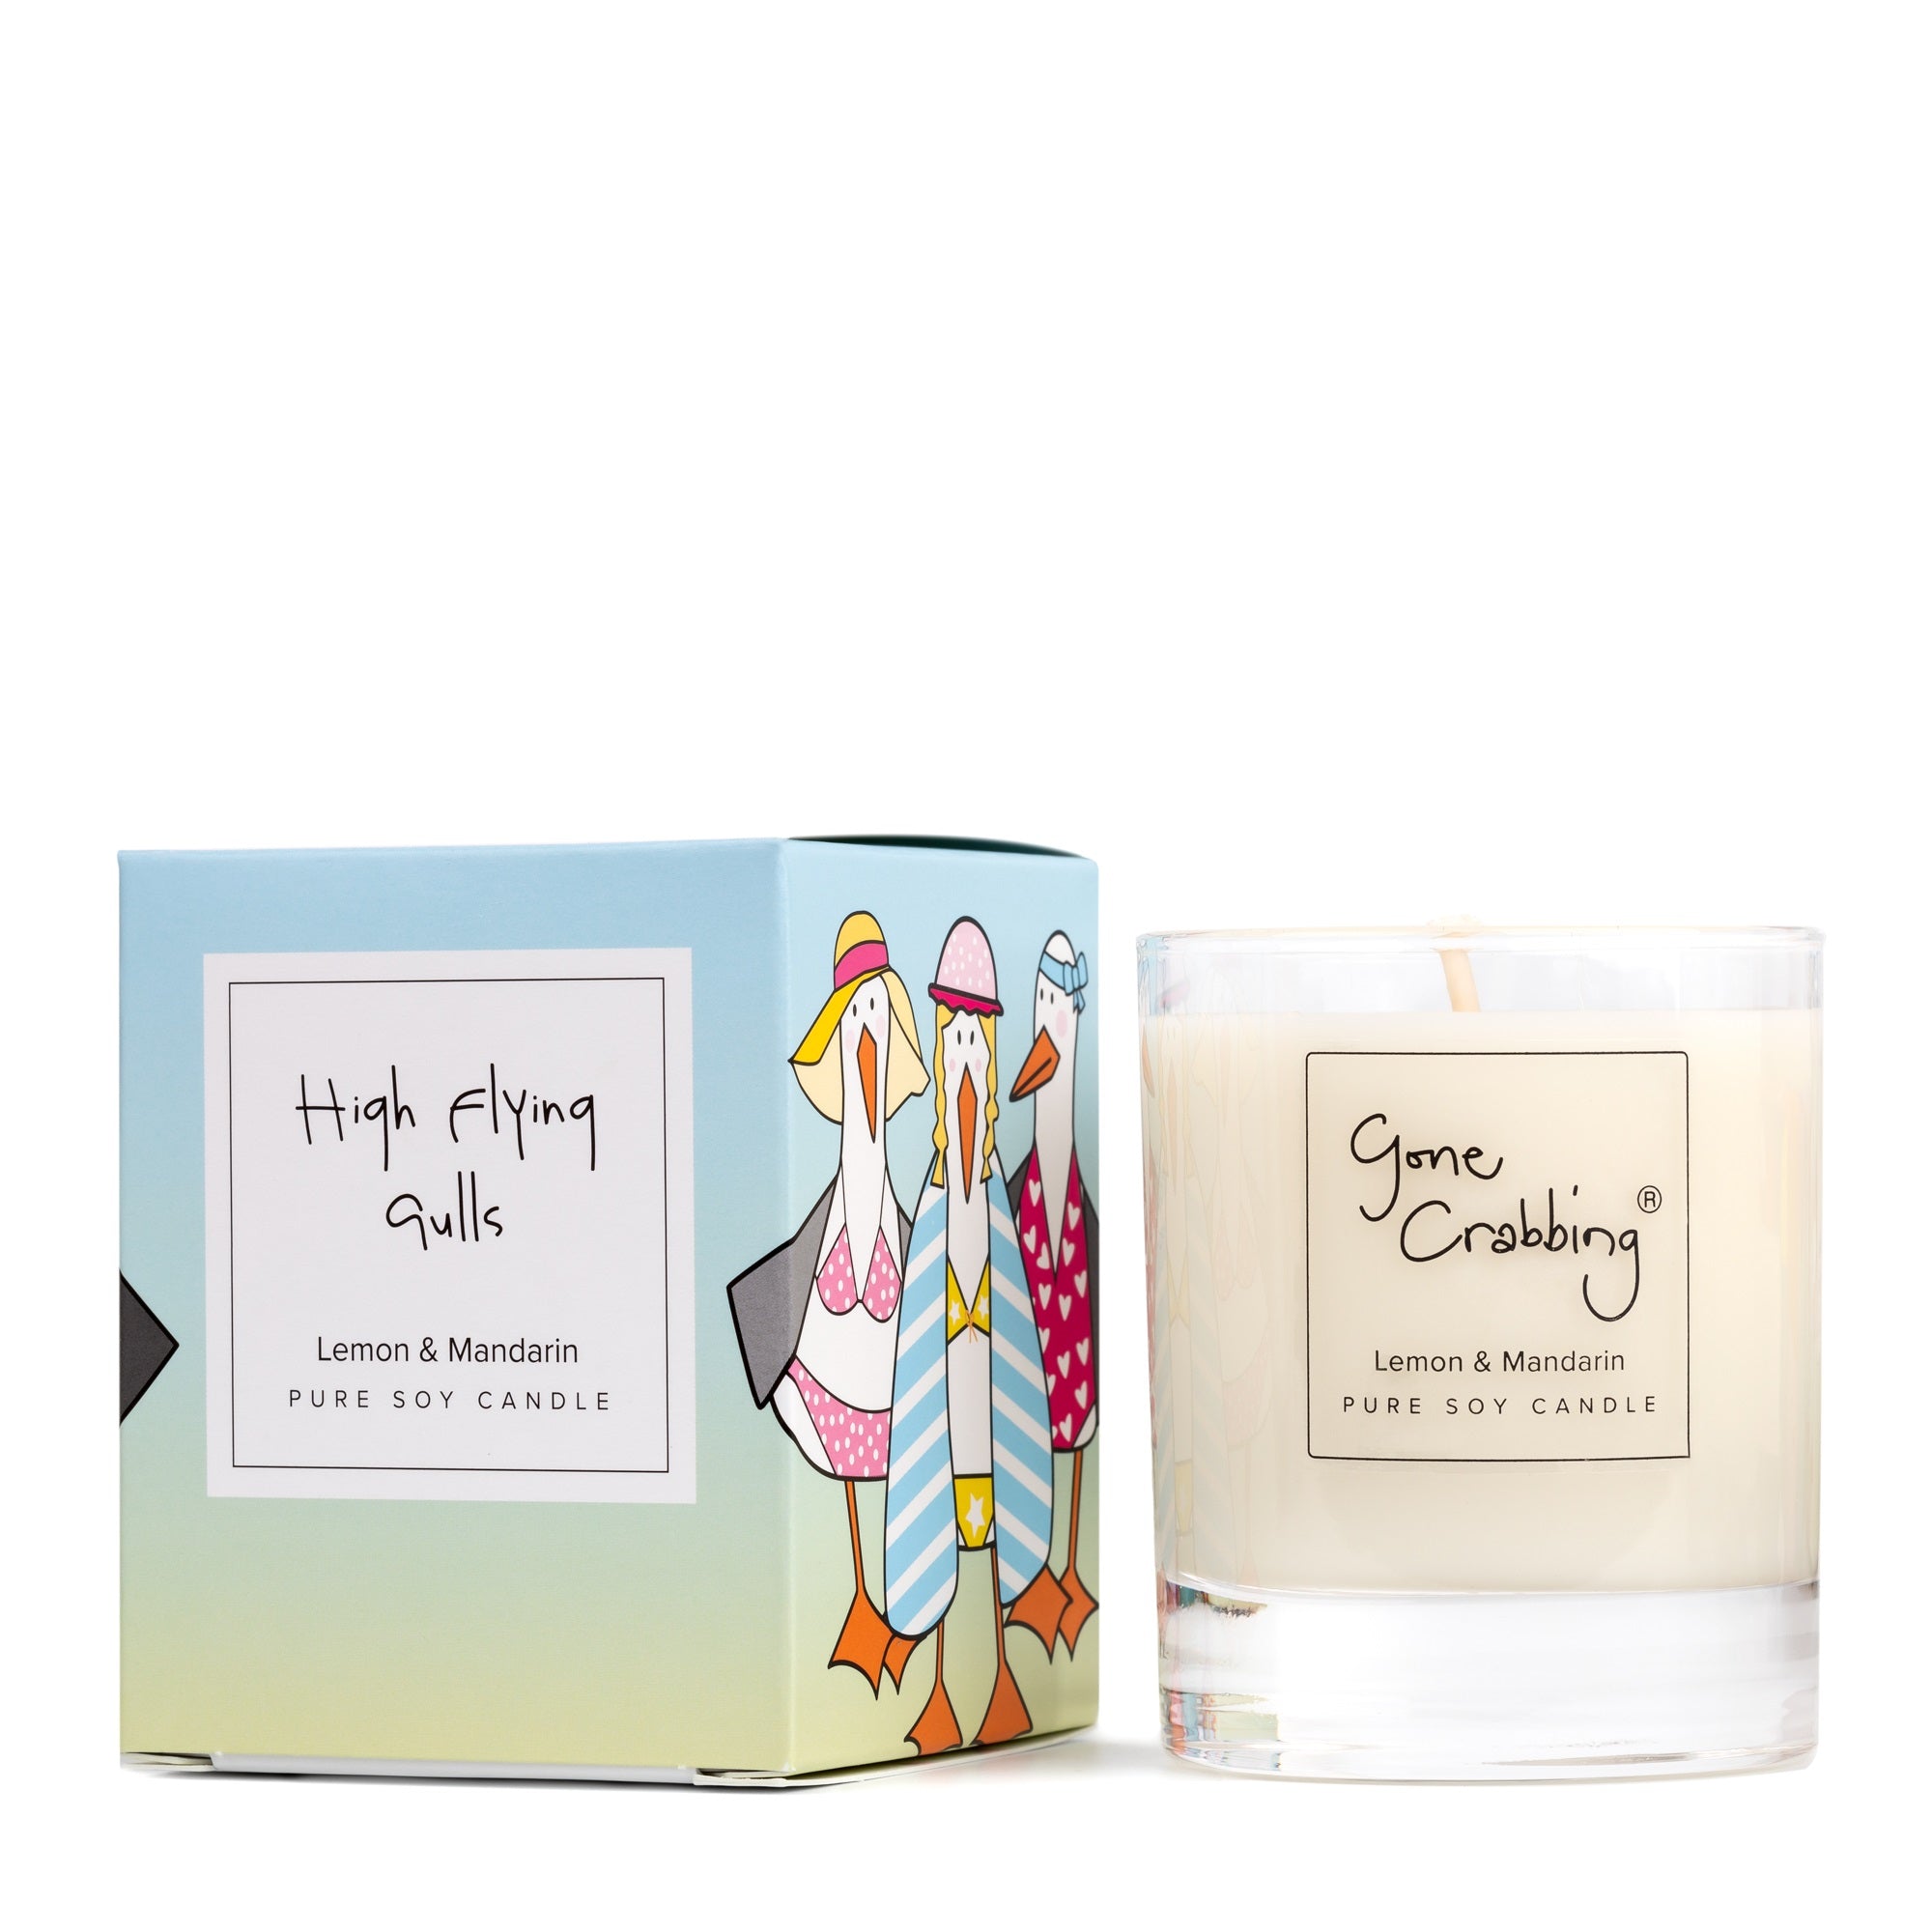 New Gone Crabbing High Flying Gulls Candle